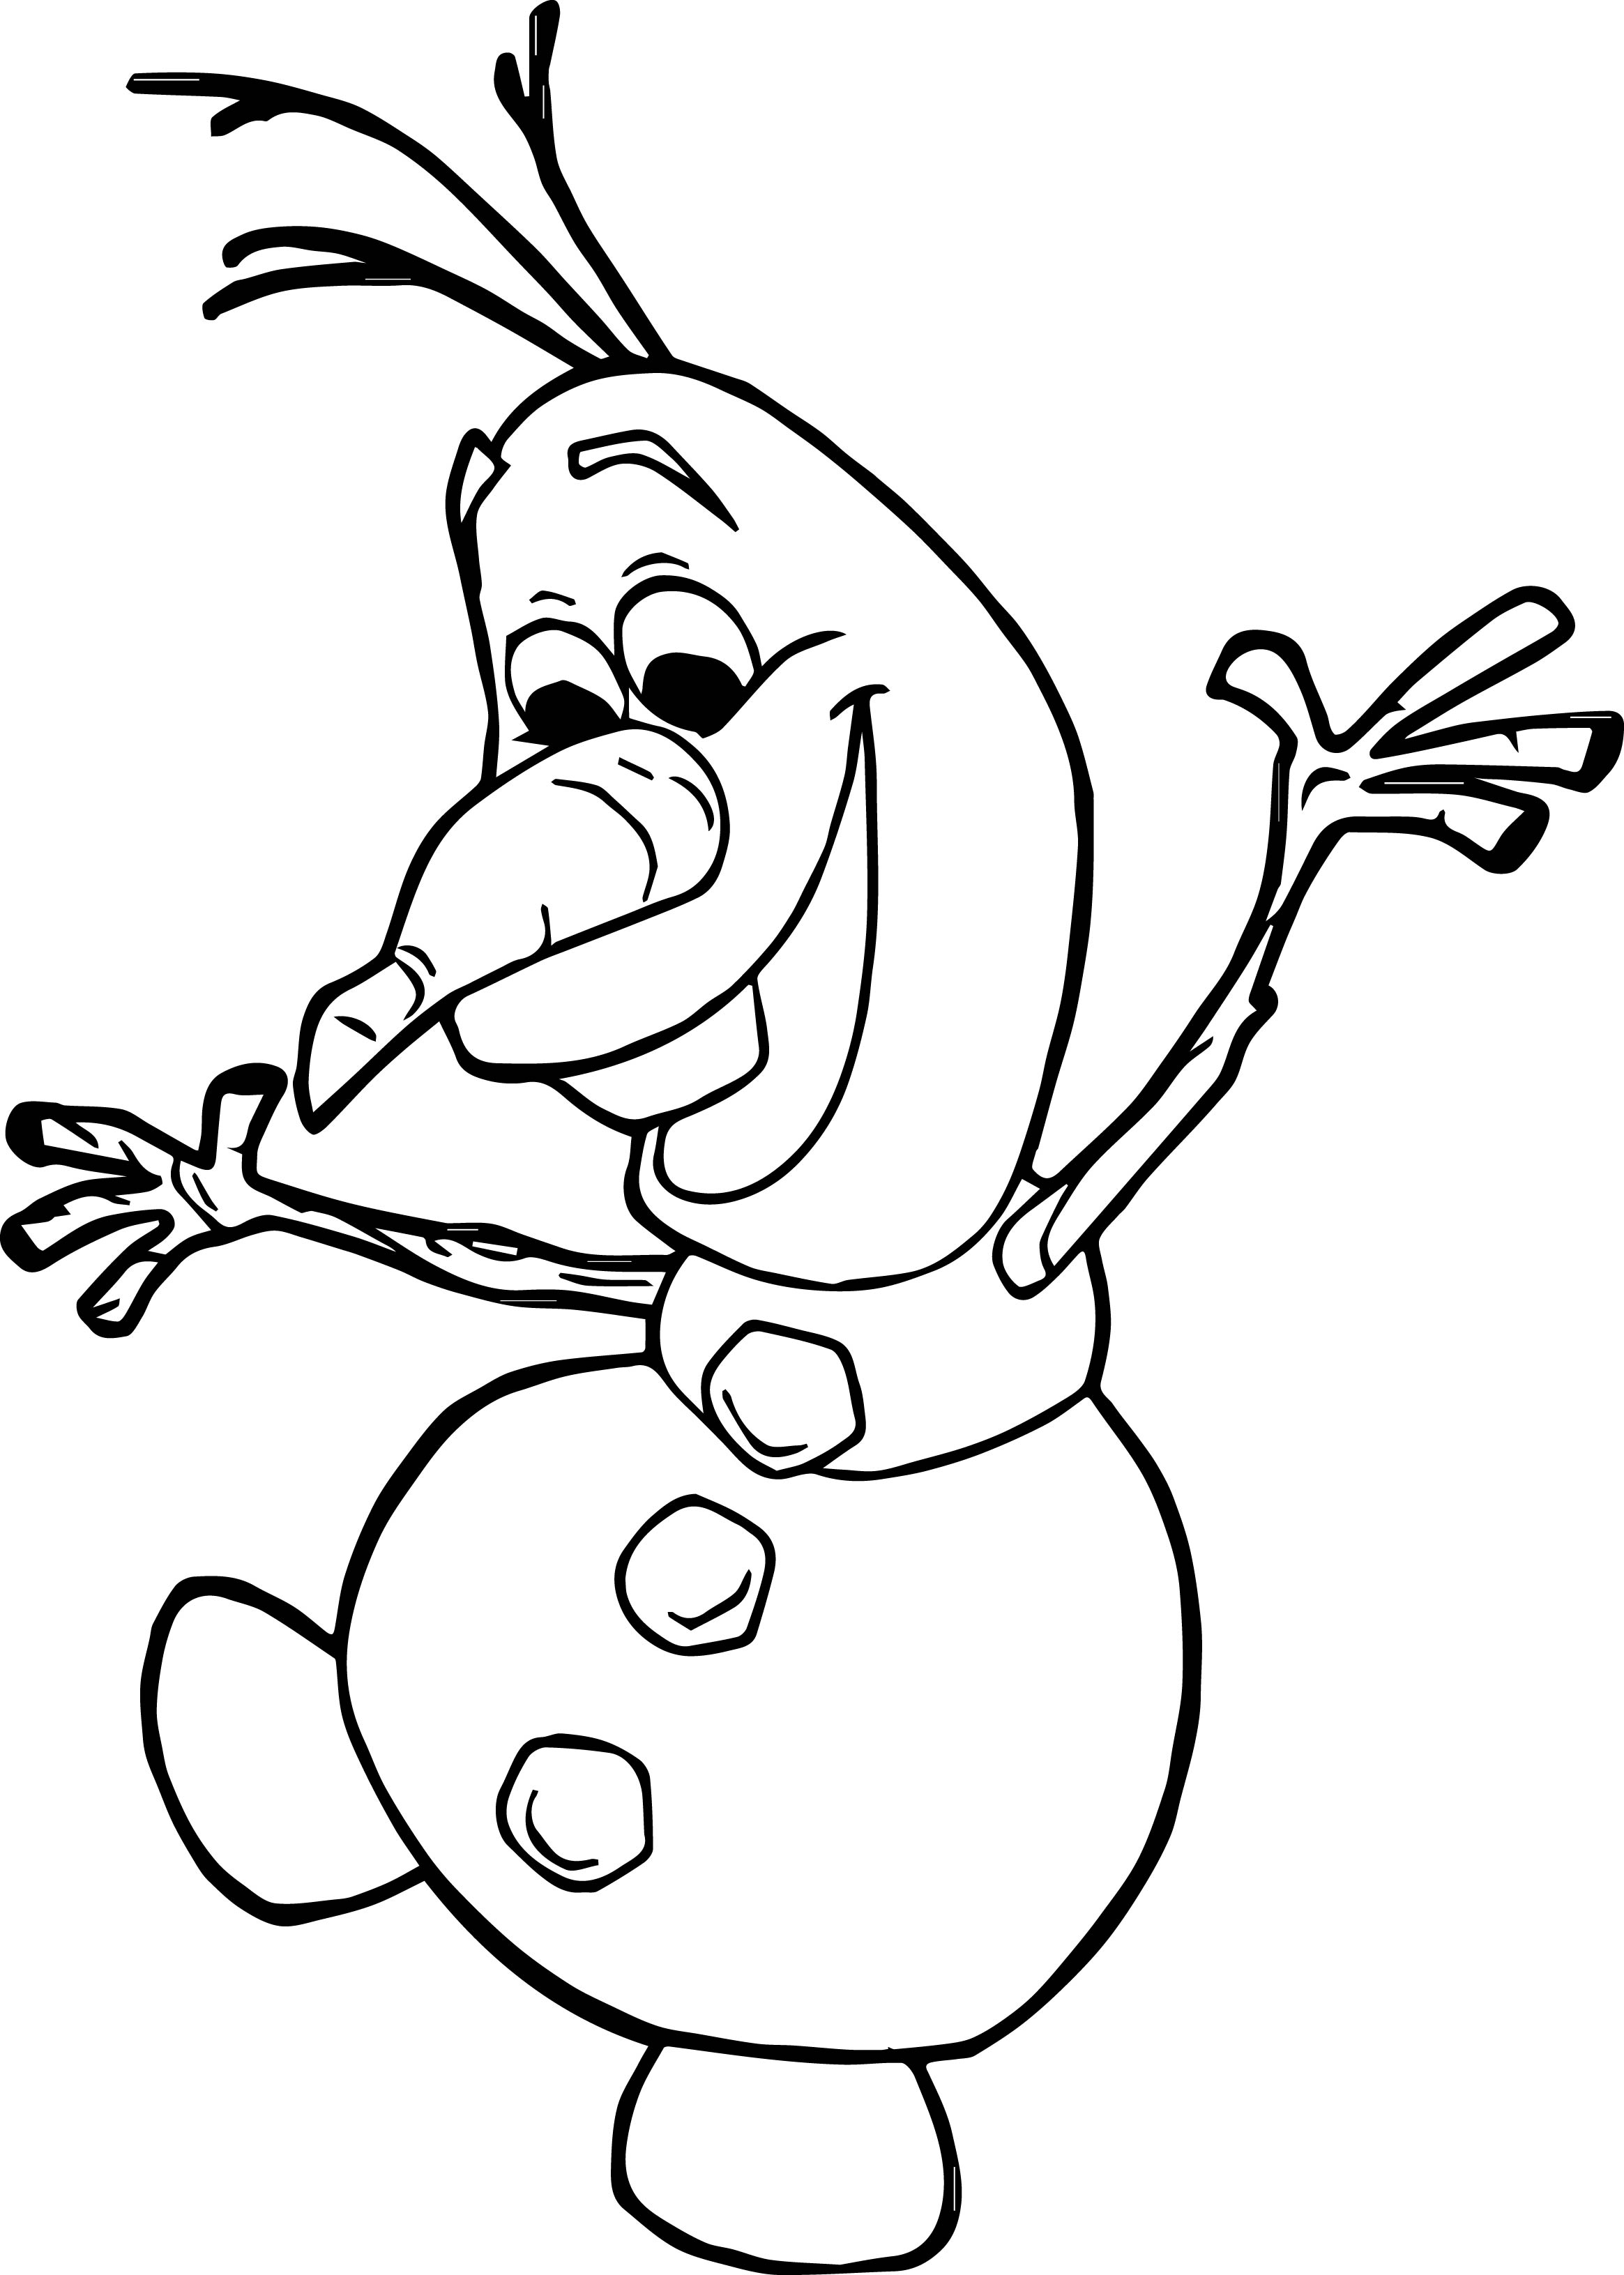 olaf-from-frozen-drawing-at-getdrawings-free-download